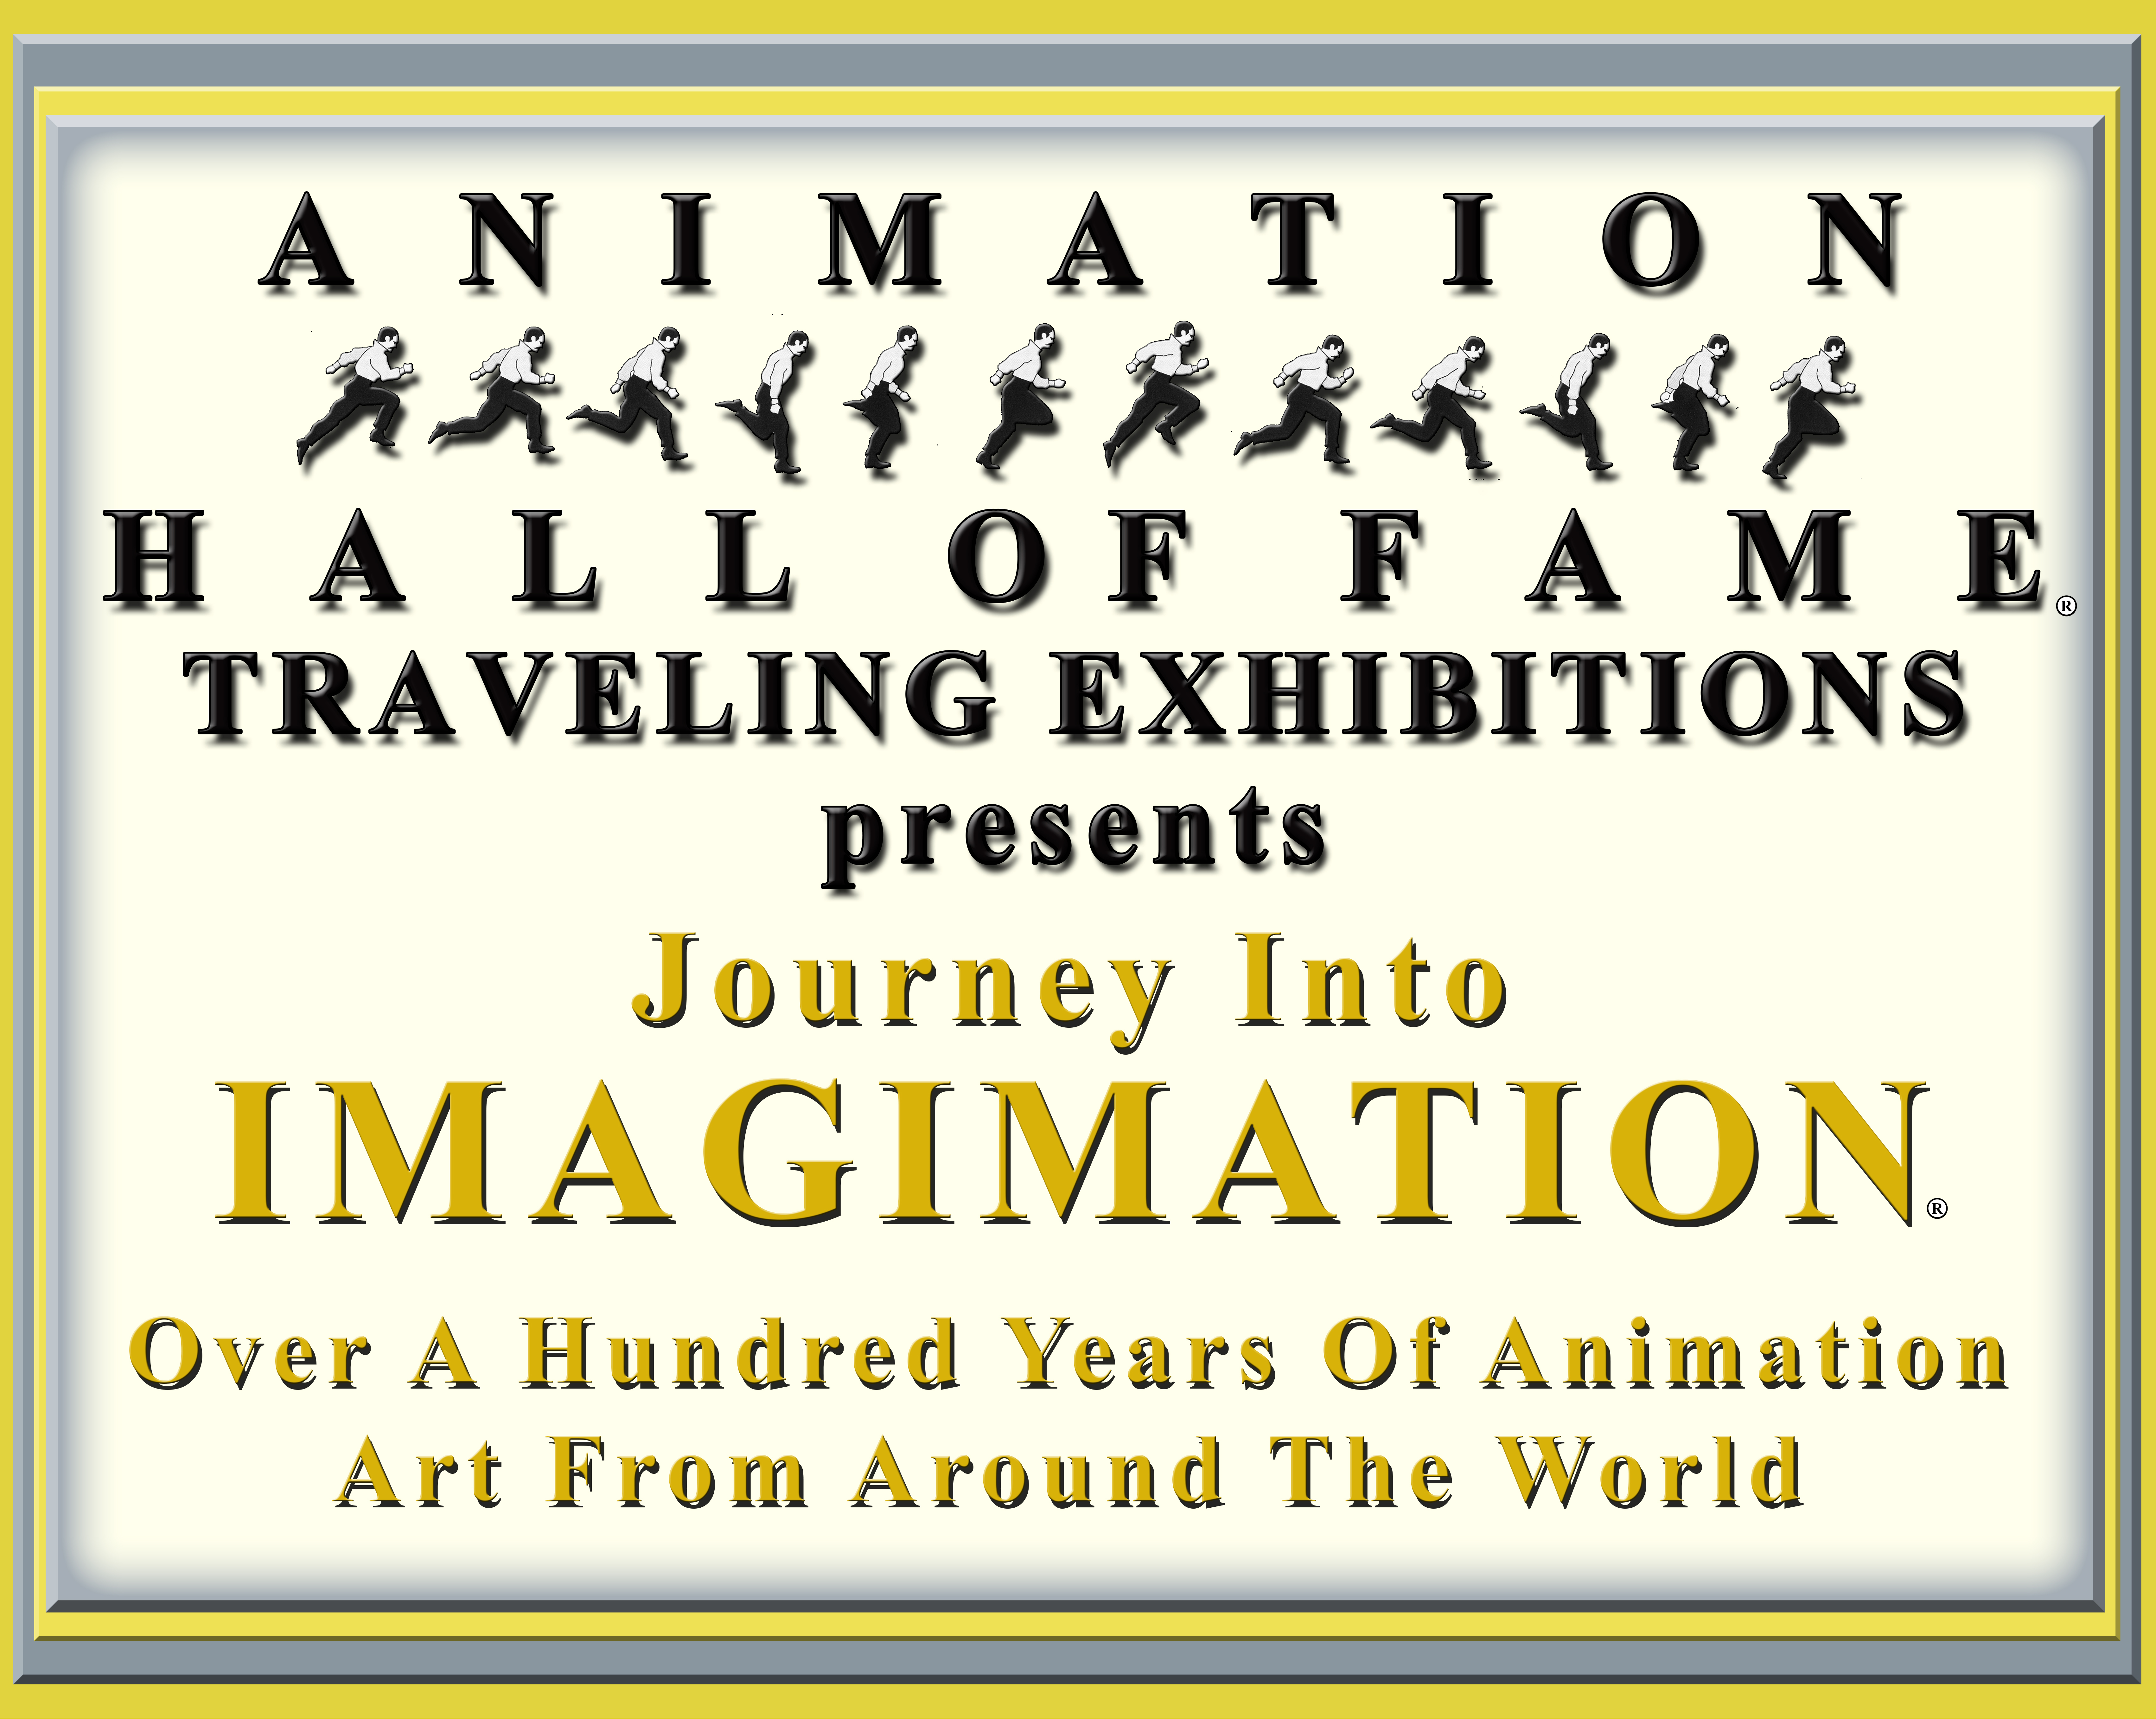 Animation Hall of Fame Presents Journey into Imagimation 100 Years of Animation Art From Around the World